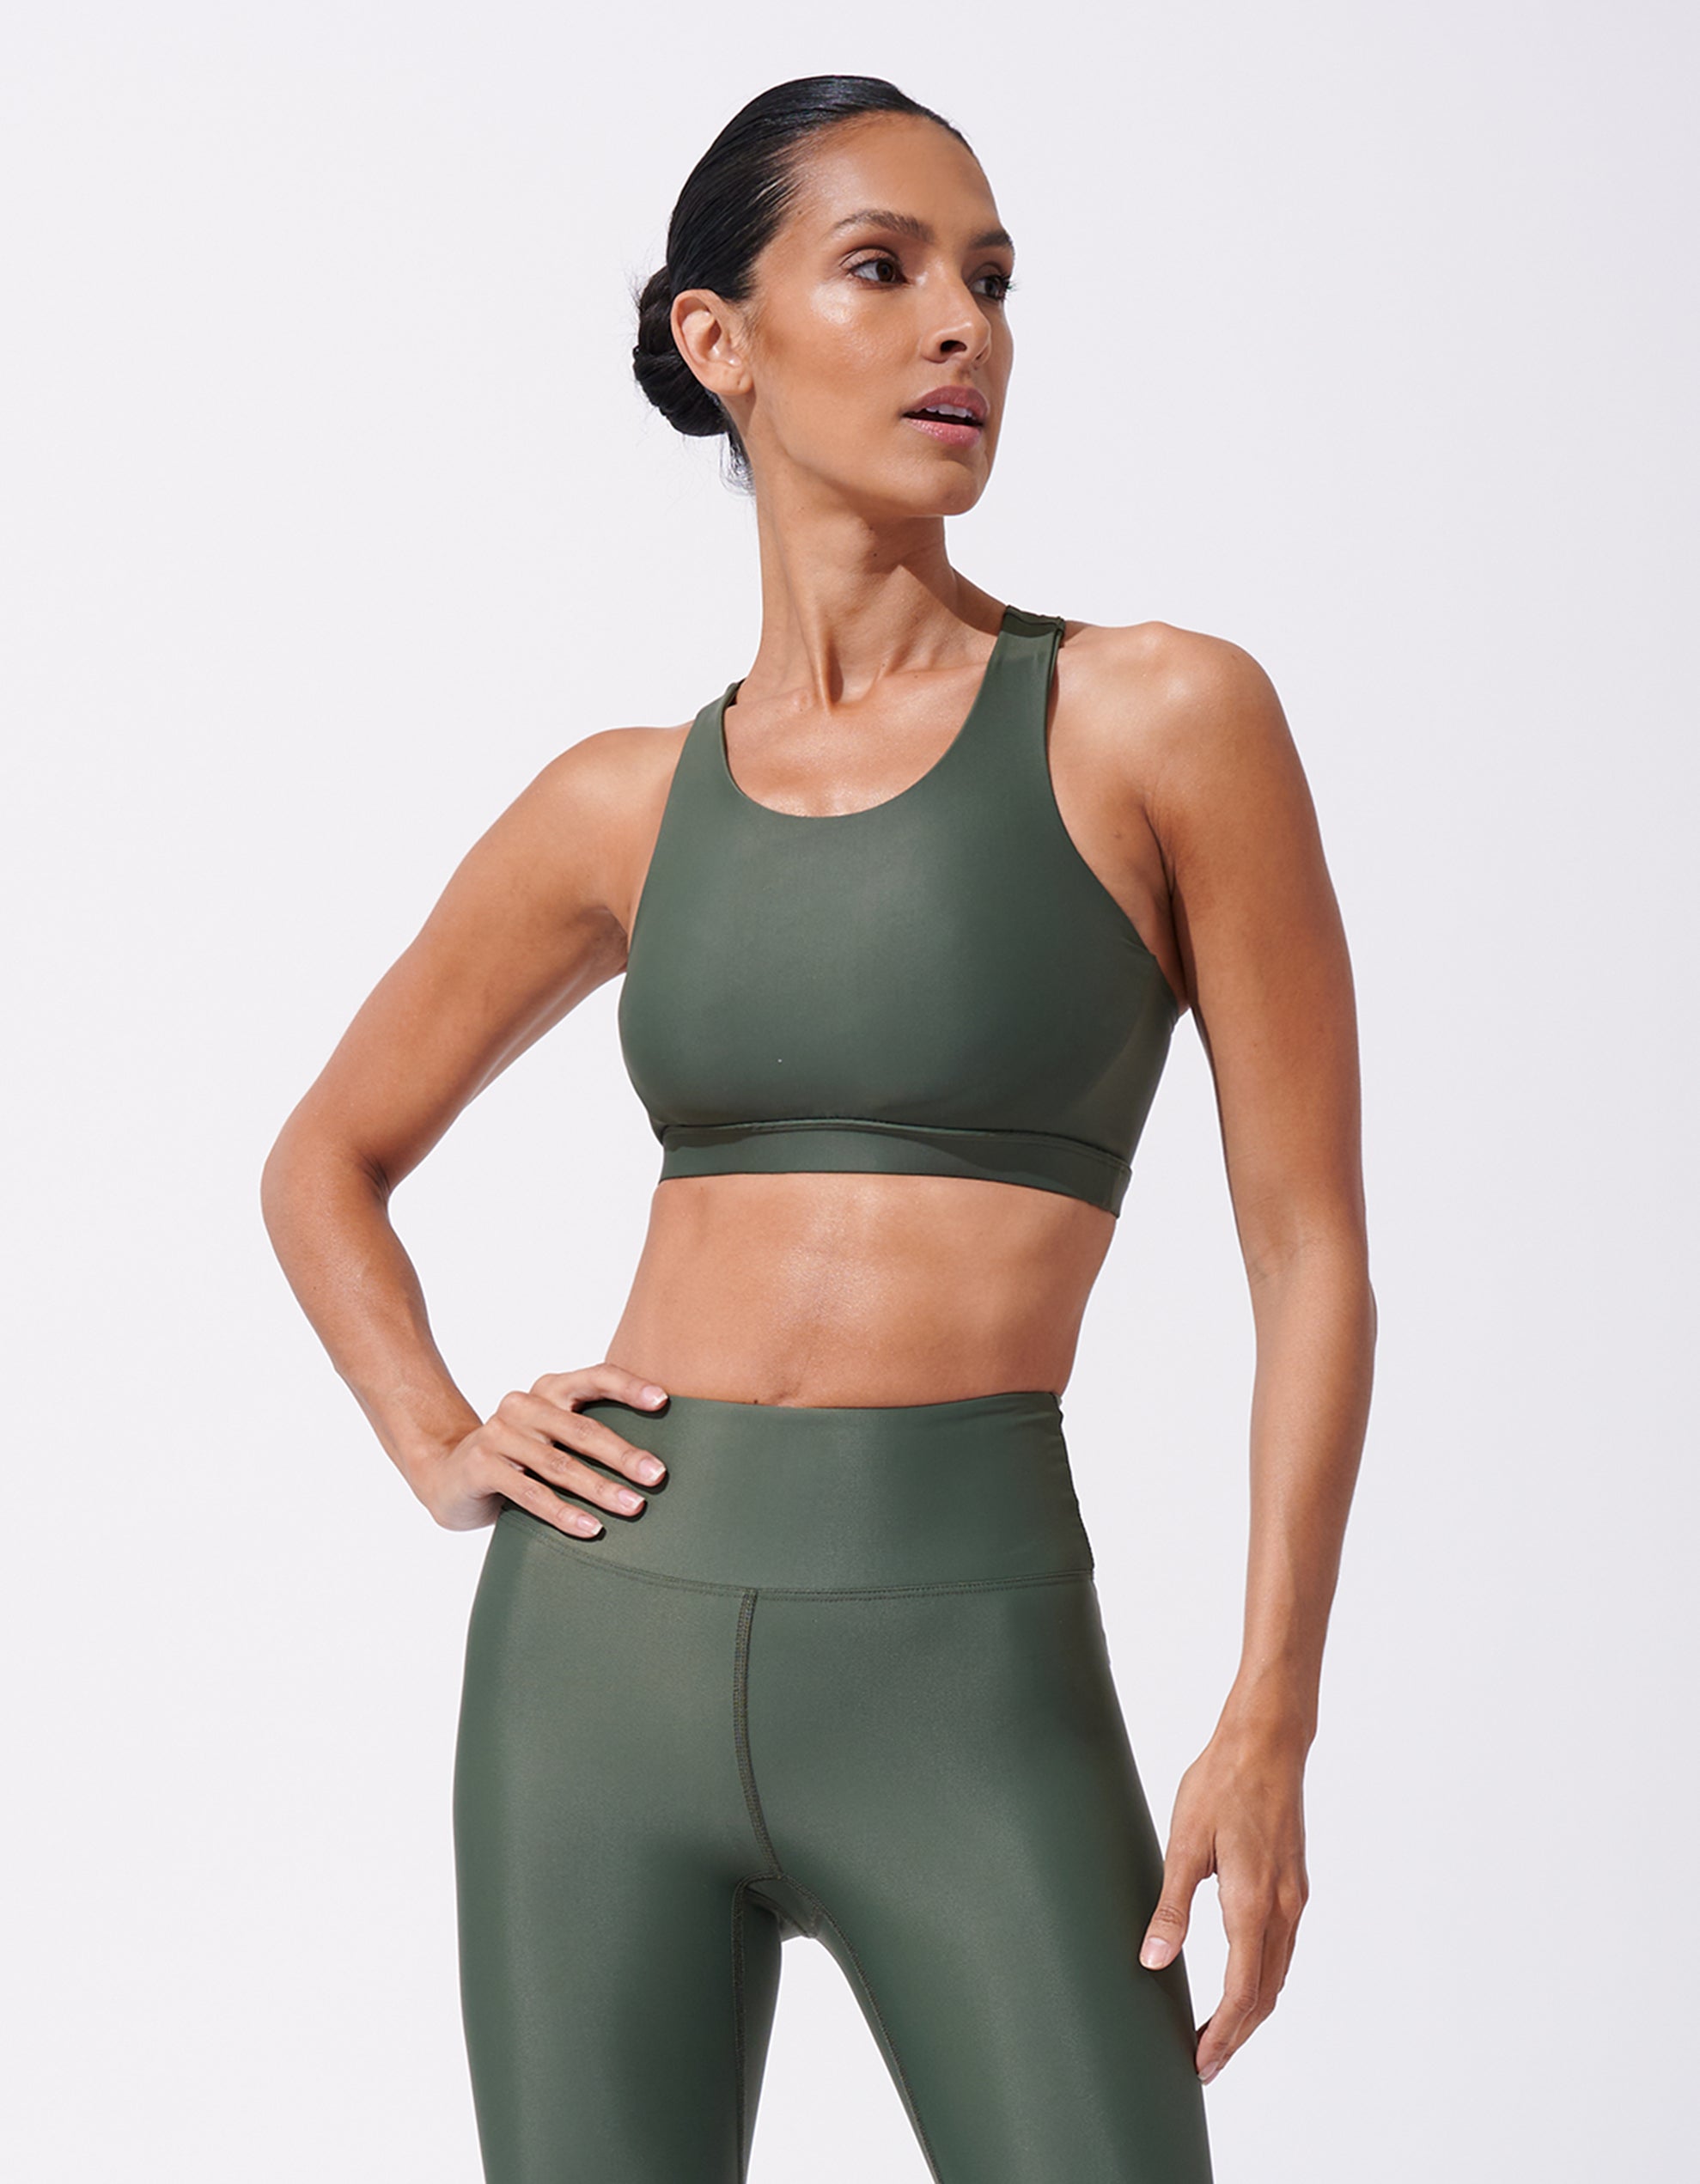 Get On The Green Rib Sports Bra, Activewear Indonesia, Womens Activewear  Brands